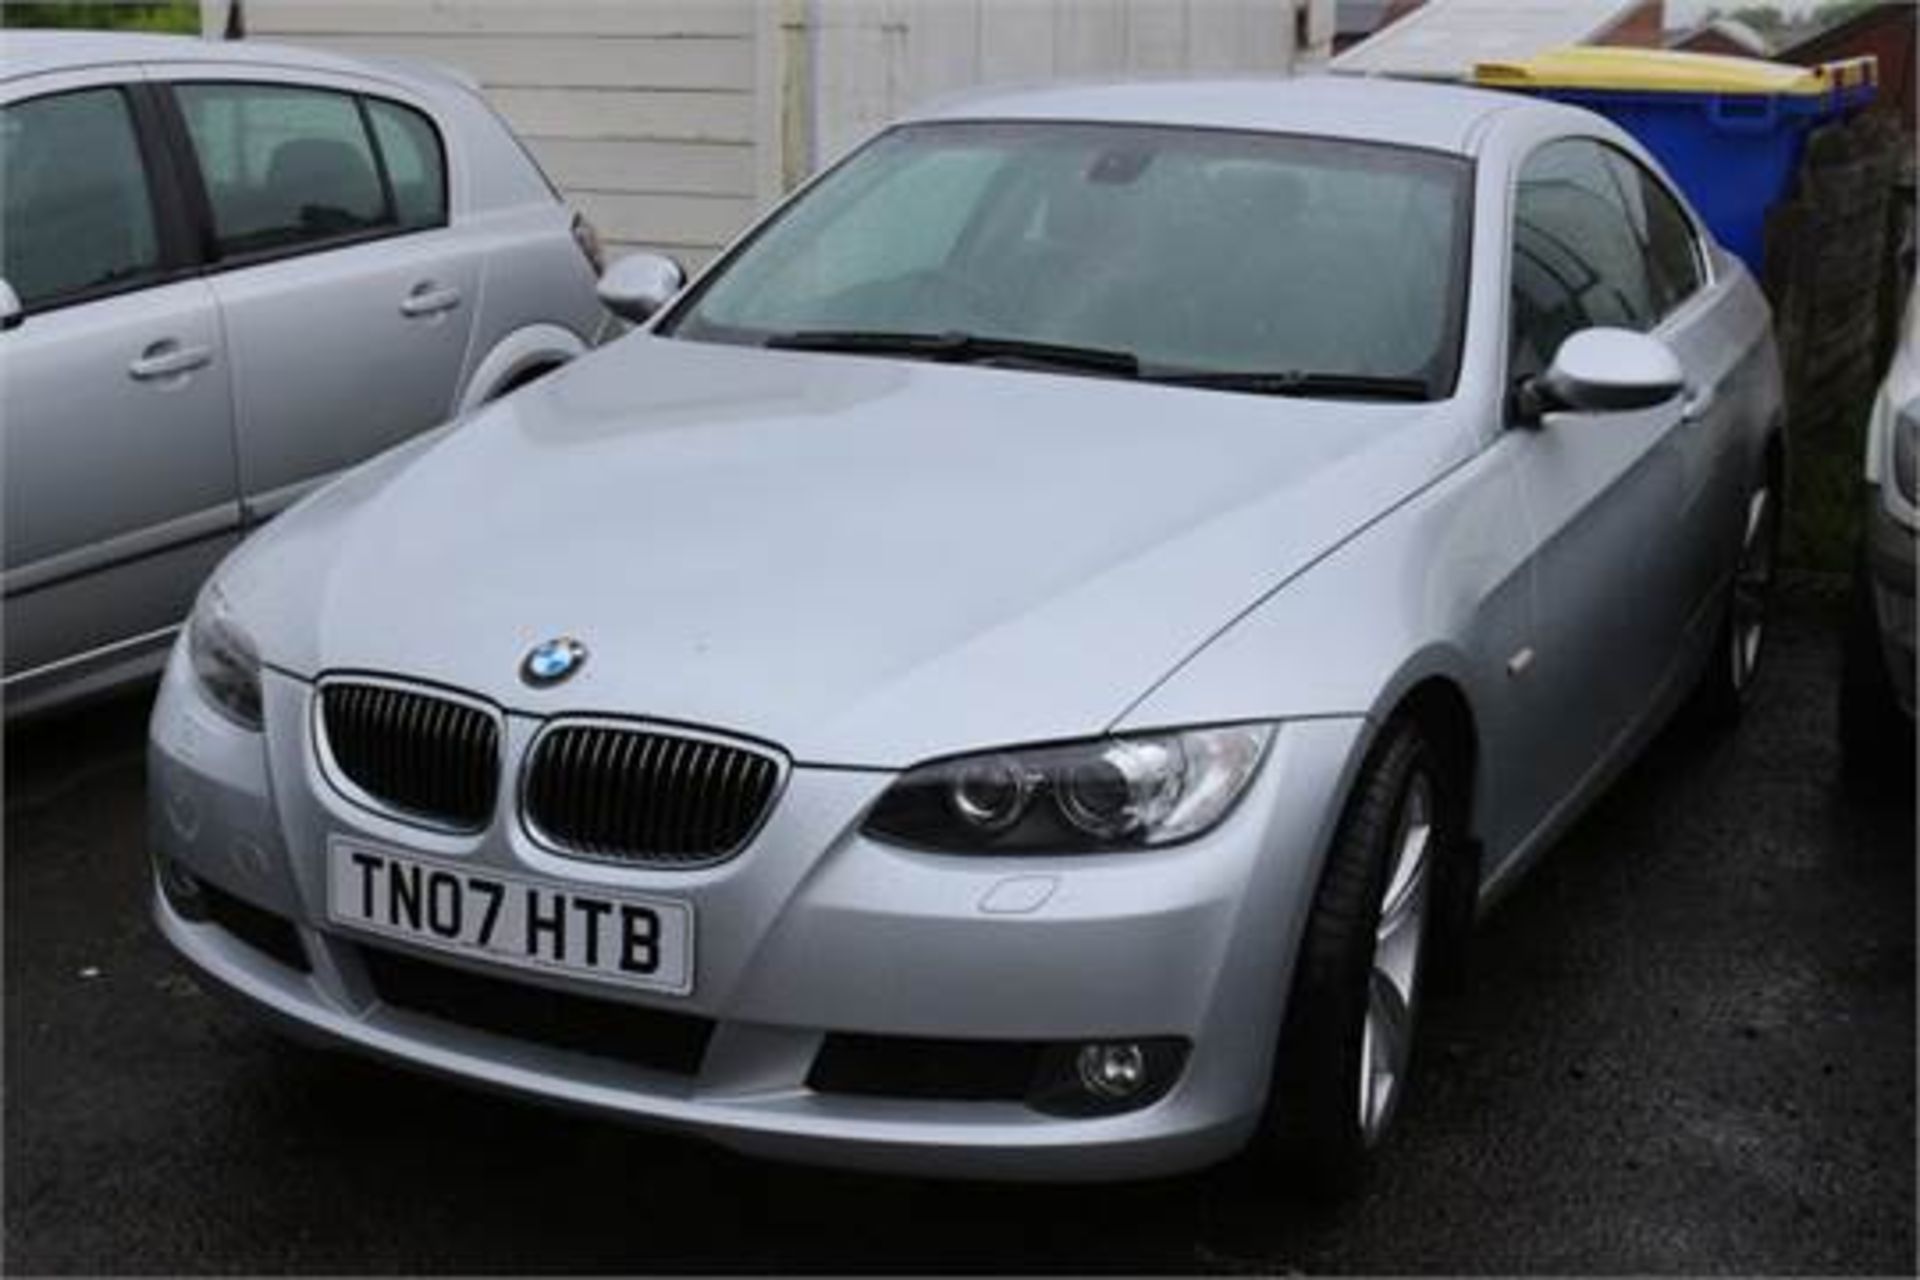 BMW, 330 SE COUPE, TN07 HTB, 3-0 LTR, PETROL, AUTOMATIC, 2 DOOR COUPE, 25.05.2007, CURRENT - Image 3 of 13